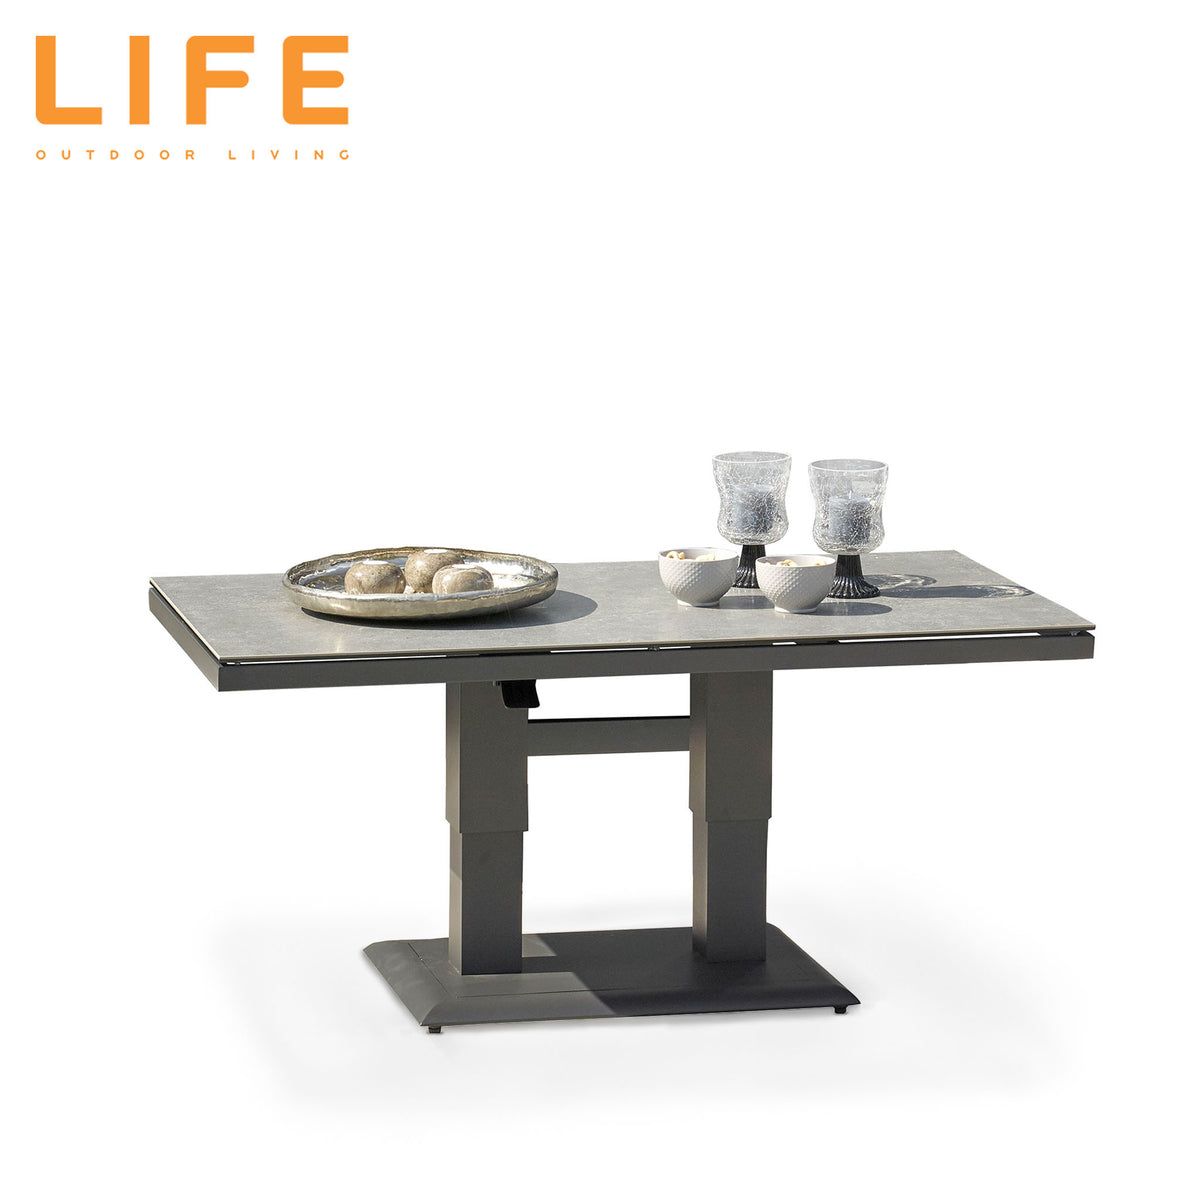 LIFE Timber Lounge Set with Height Adjustable Table